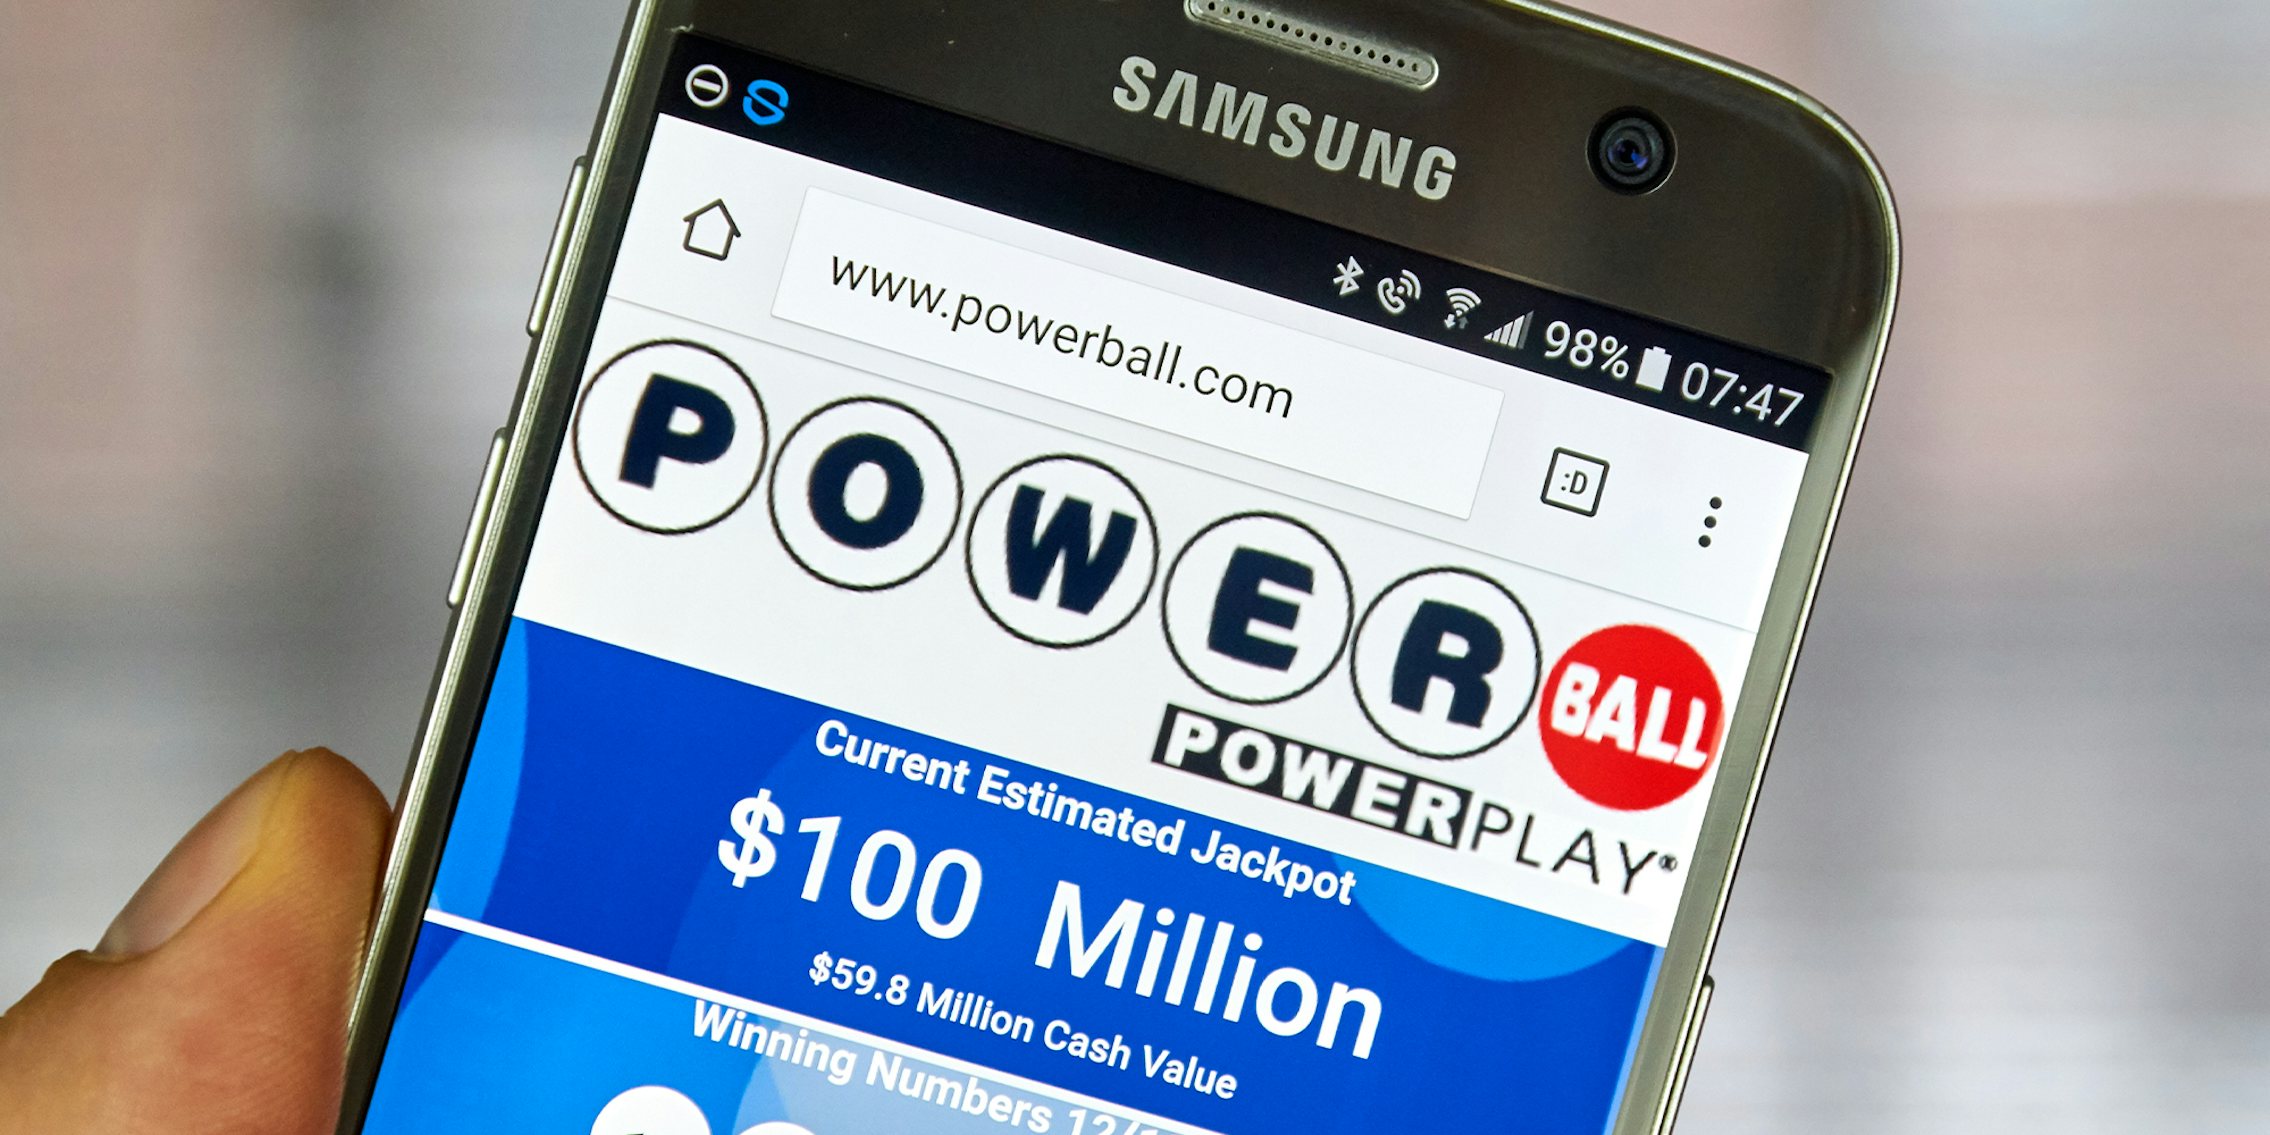 What Is the Powerball Jackpot? And How Does Powerball Work?